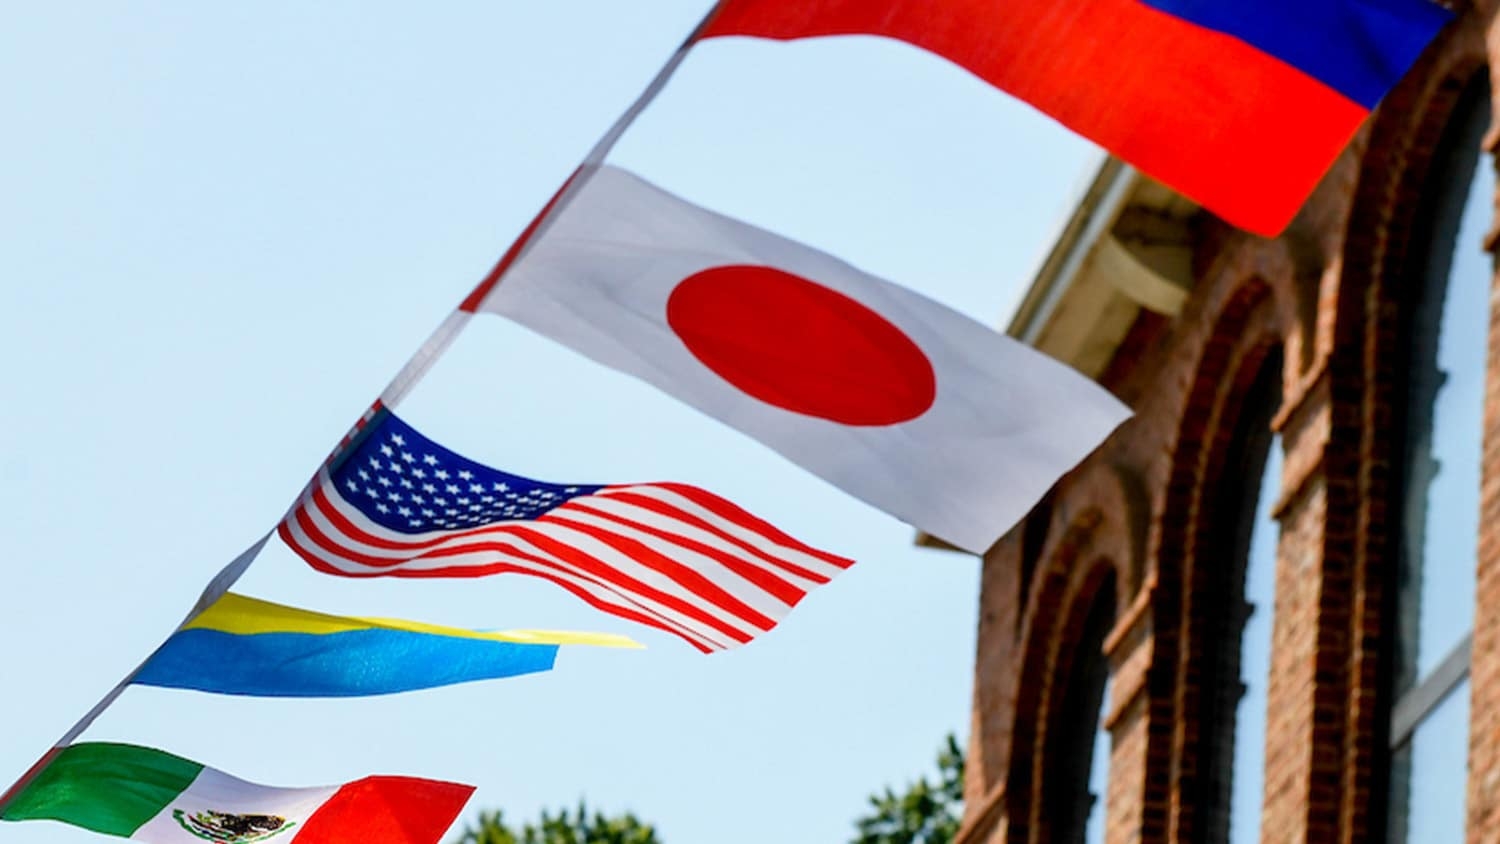 The American and Japanese flags blow in the wind on a line next to a brick building on campus